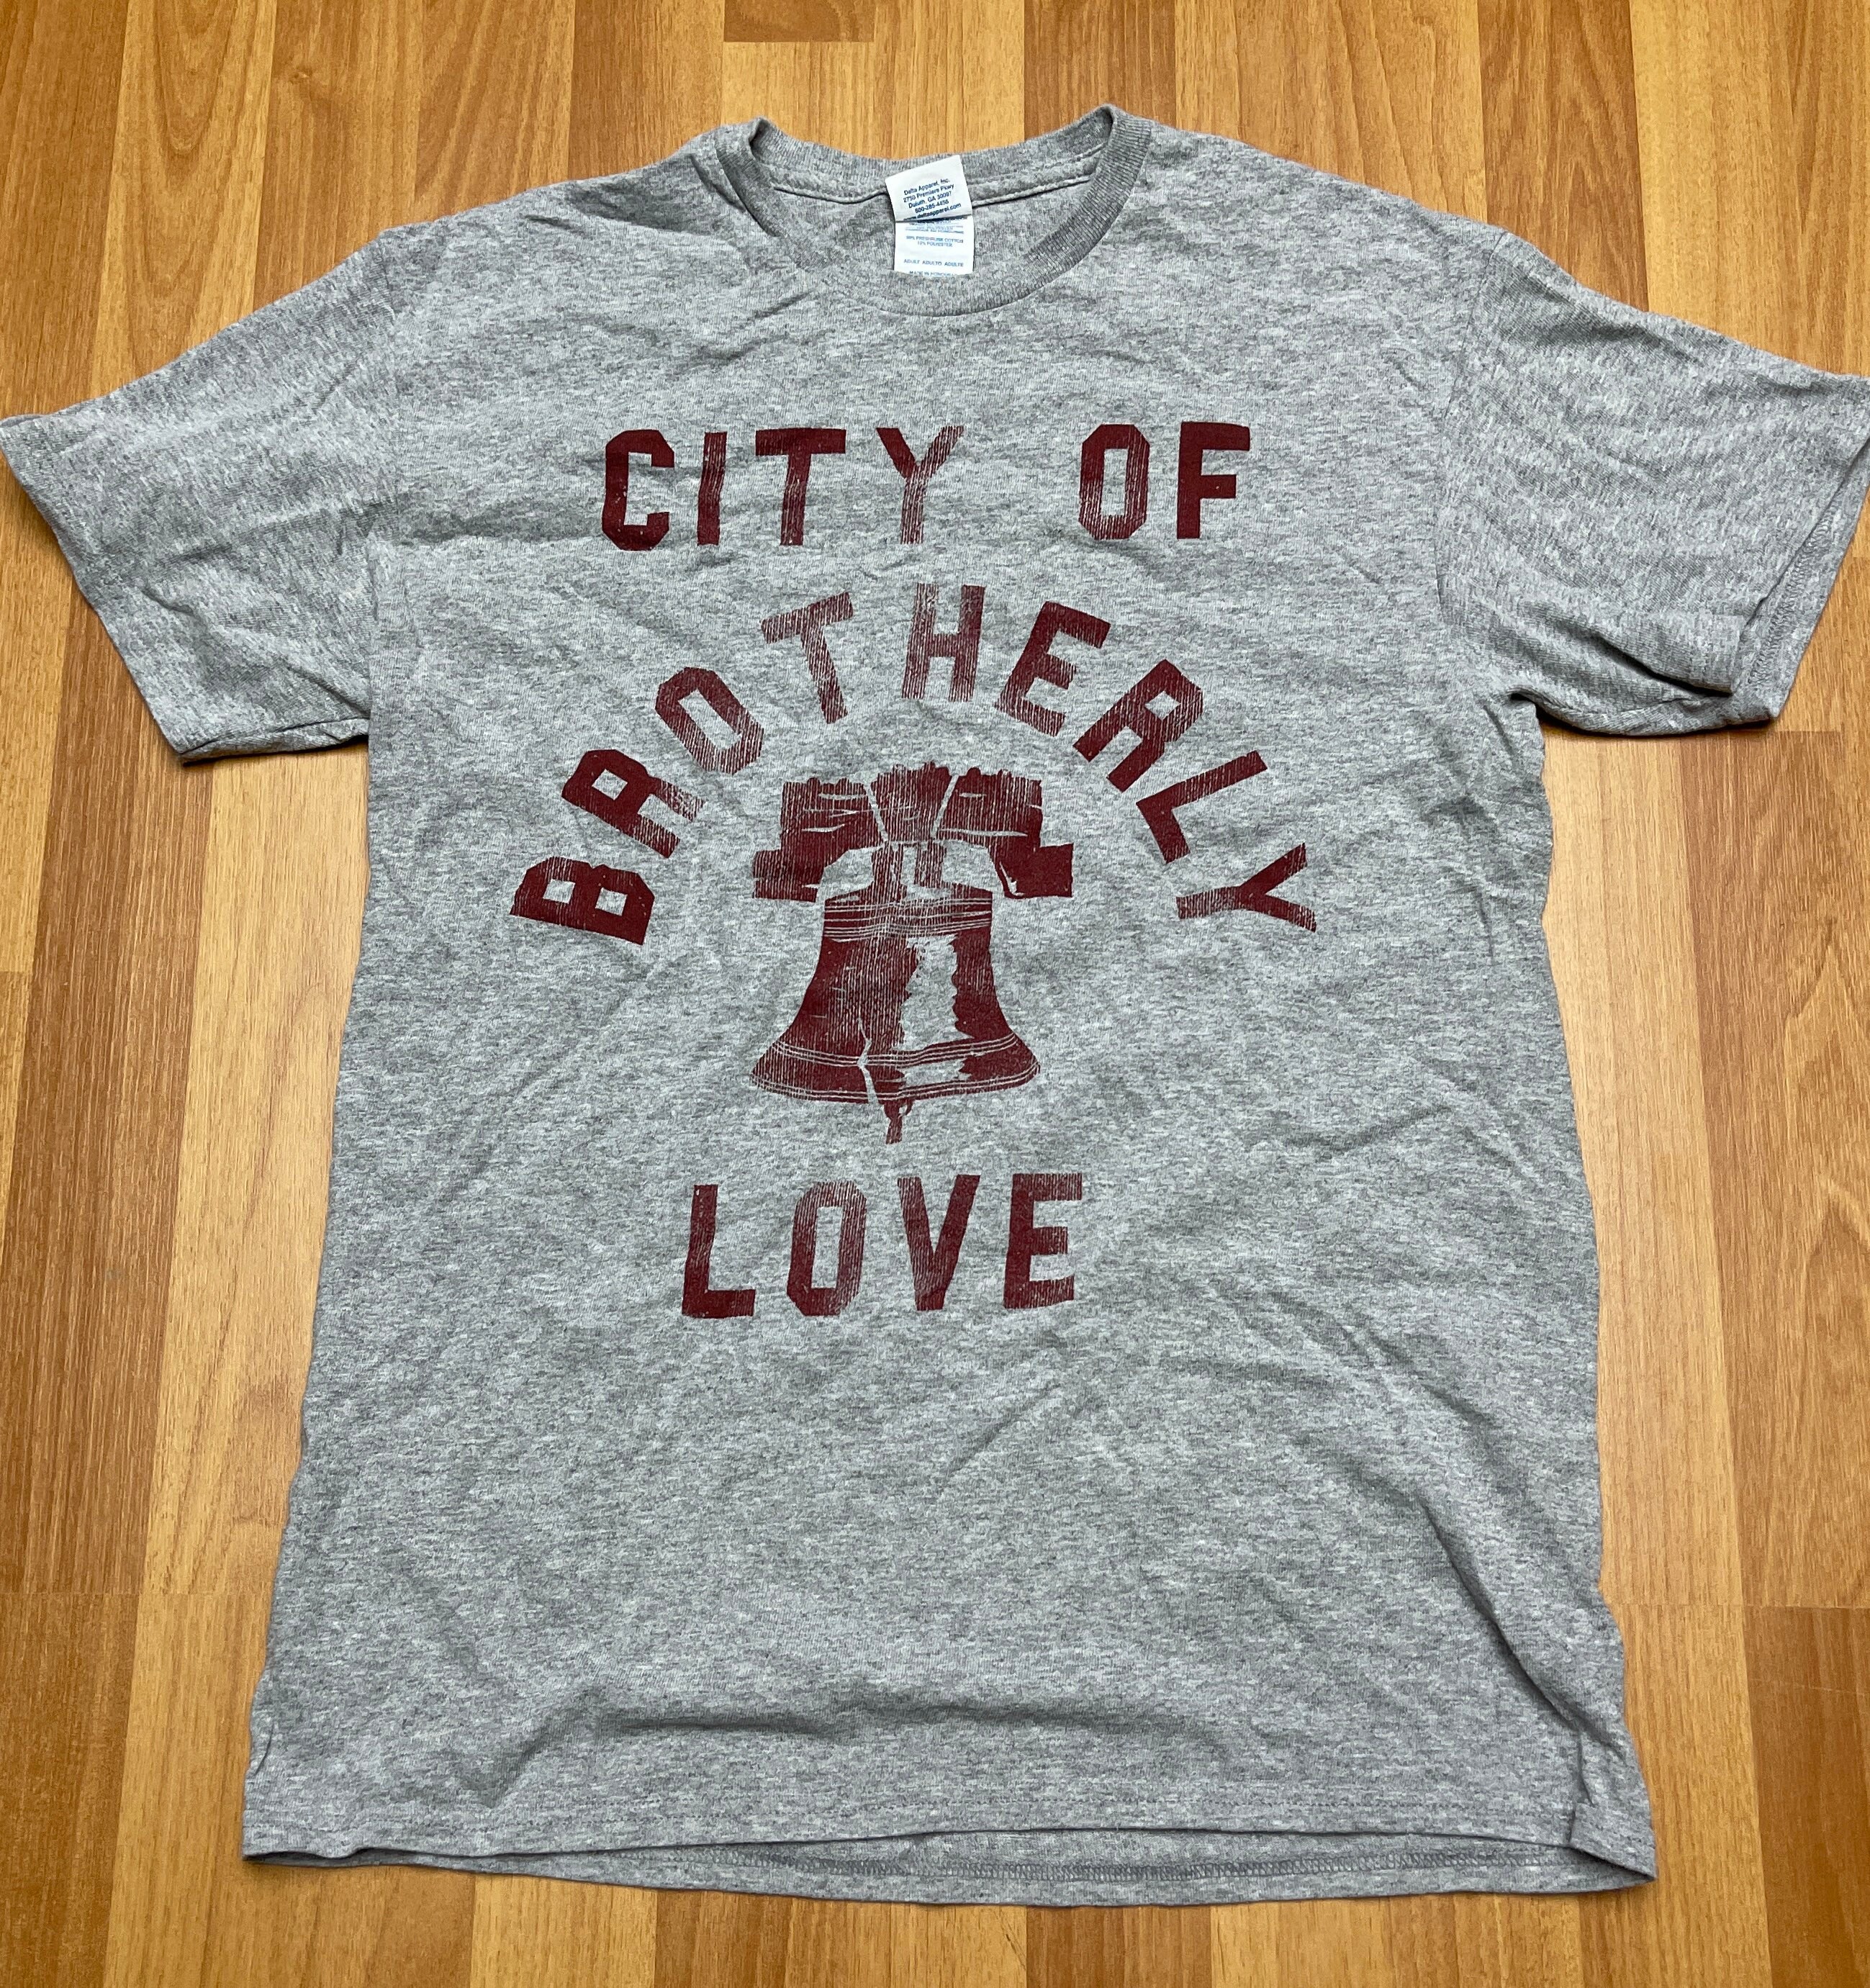 Philly Sports Shirts Brotherly Love Vs Everybody Hoodie L